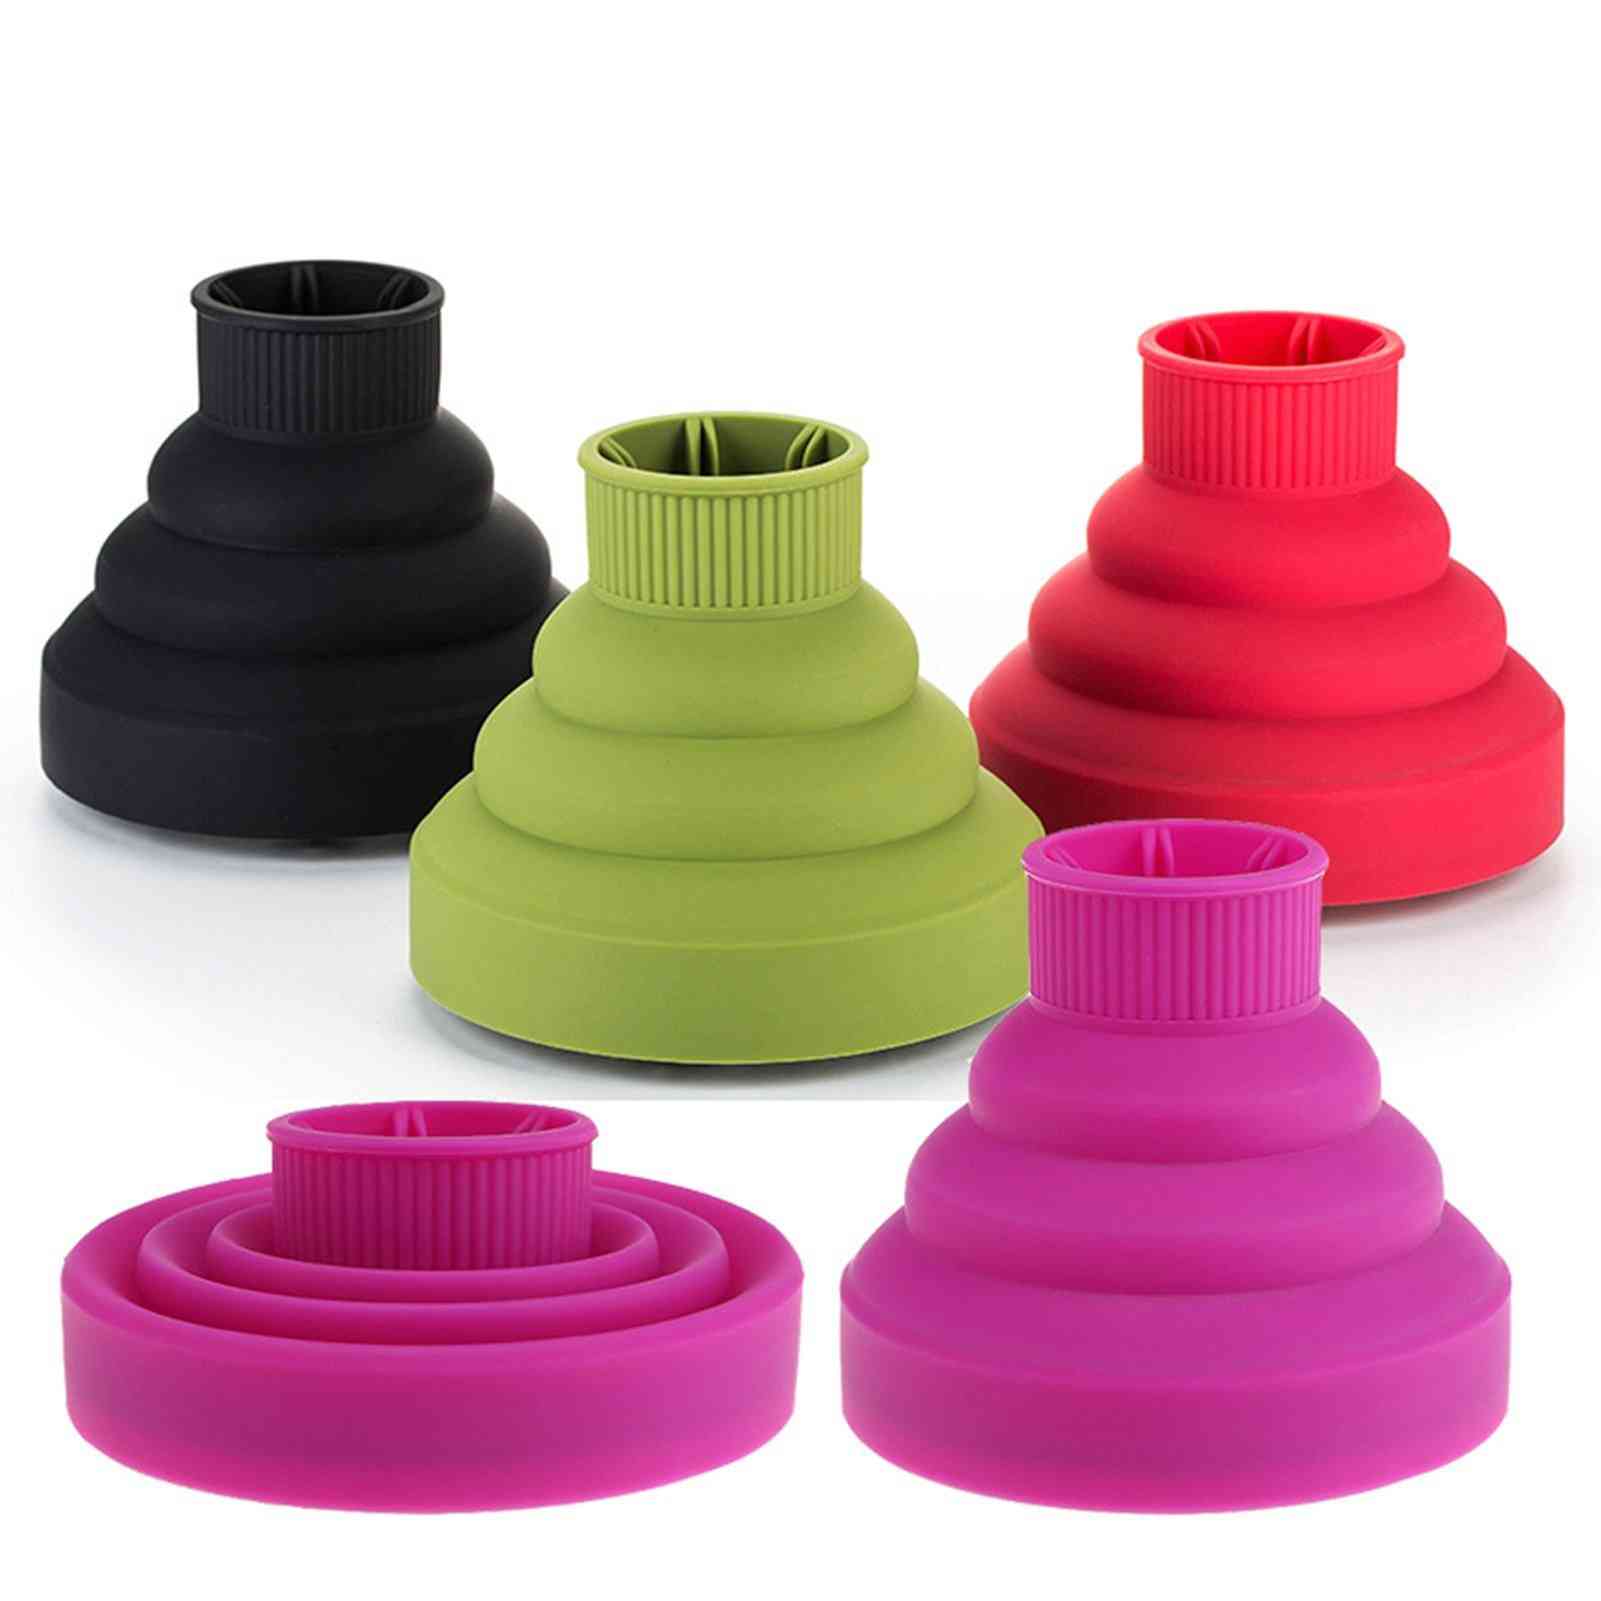 Soft Silicone Hairdryer Diffuser